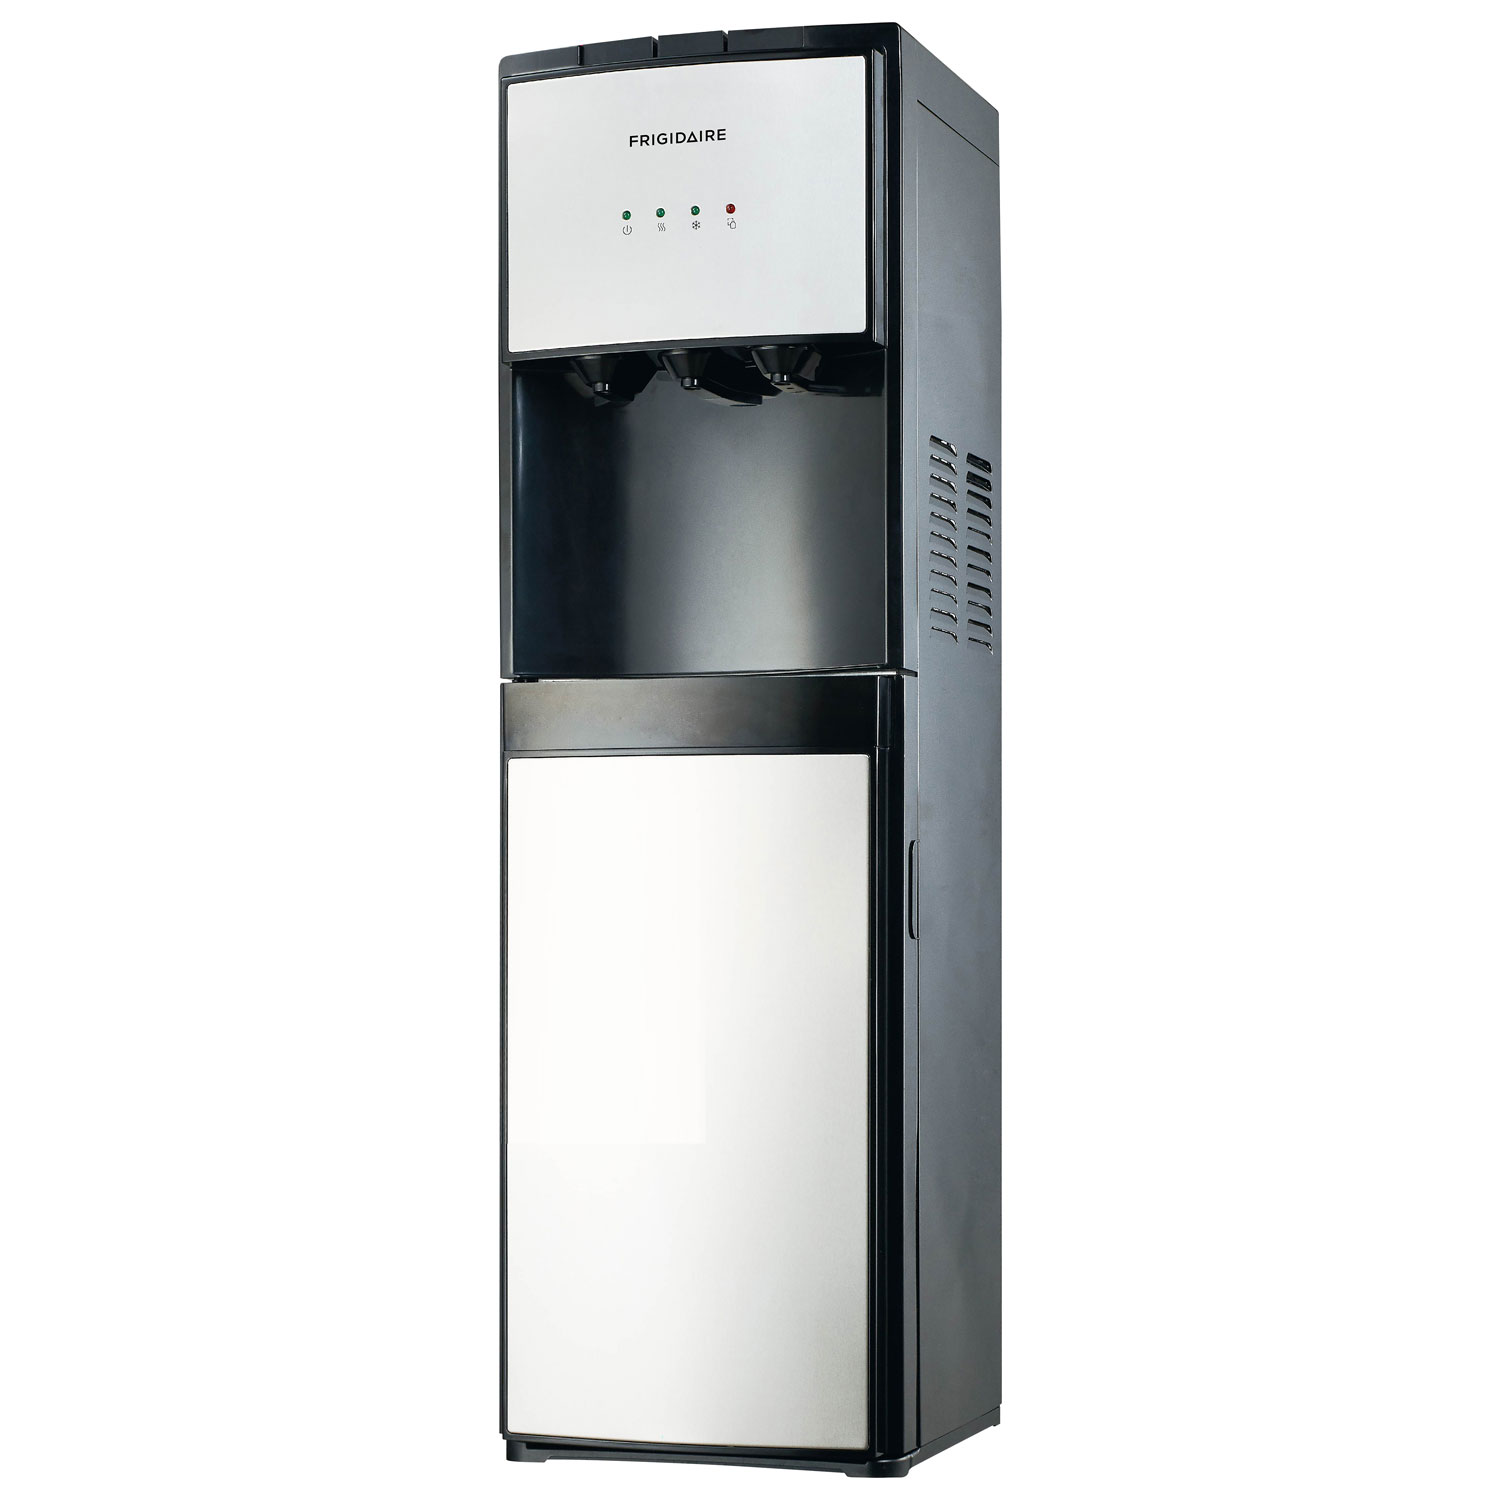 Frigidaire Warm/Cold Water Cooler (EFWC505-SS) - Stainless Steel